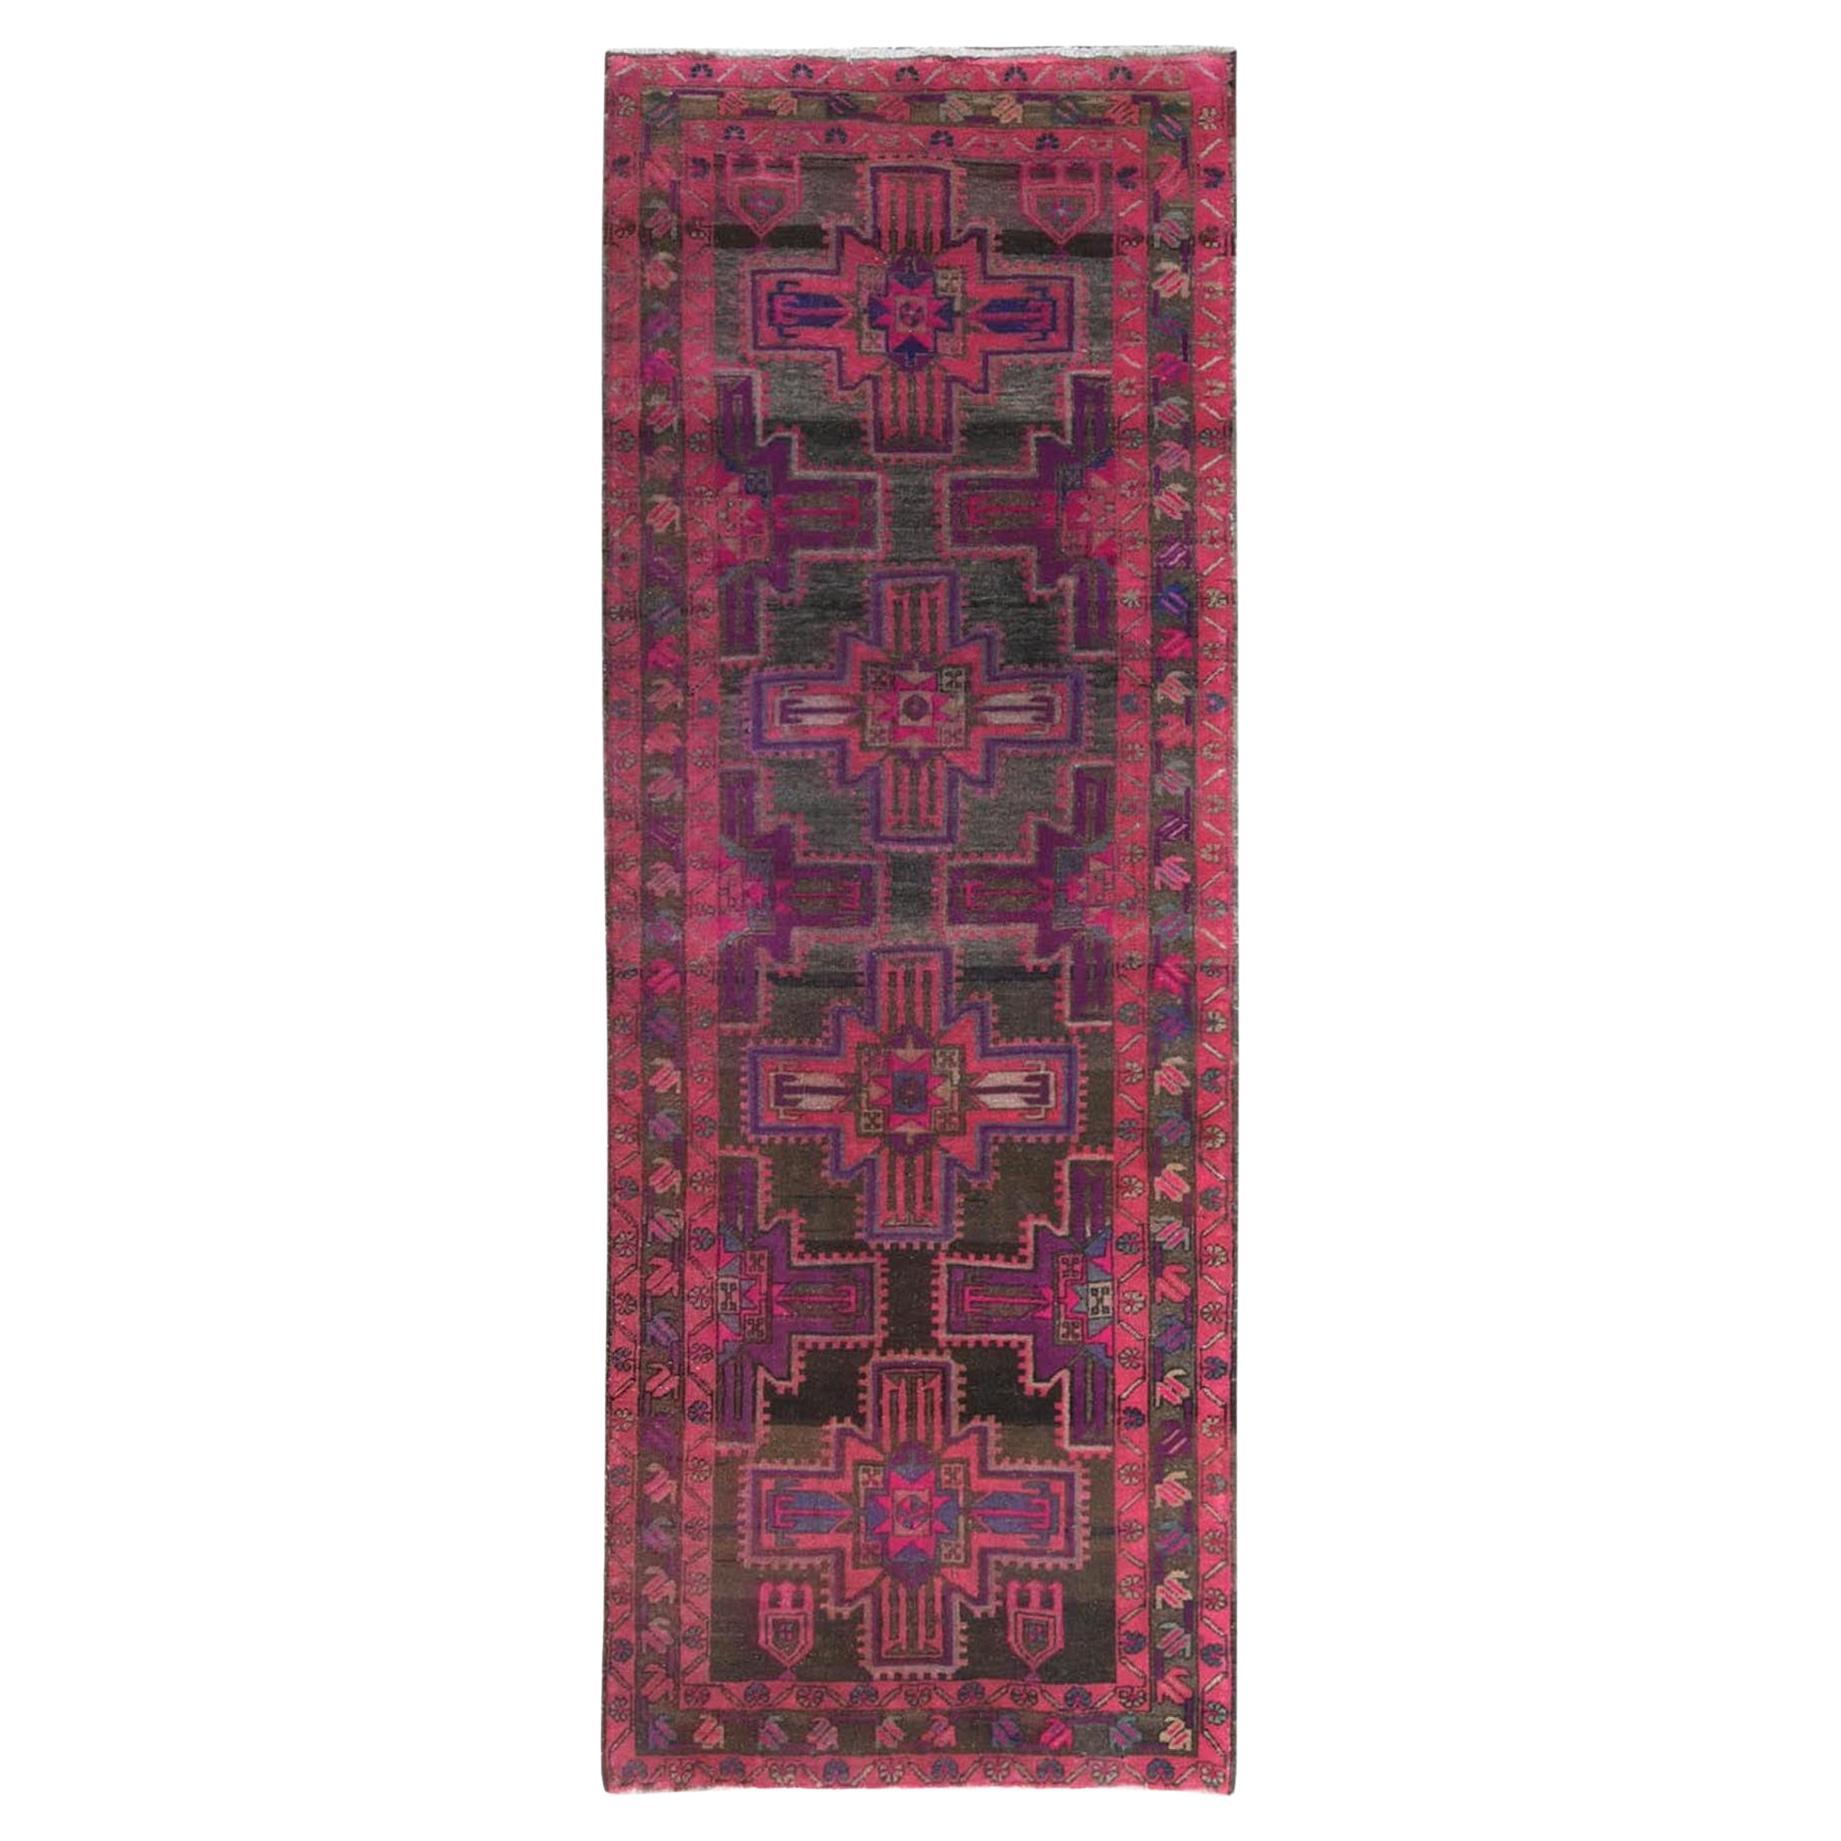 Hot Pink and Purple, Hand Knotted Vintage Persian Hamadan, Distressed Wool Rug